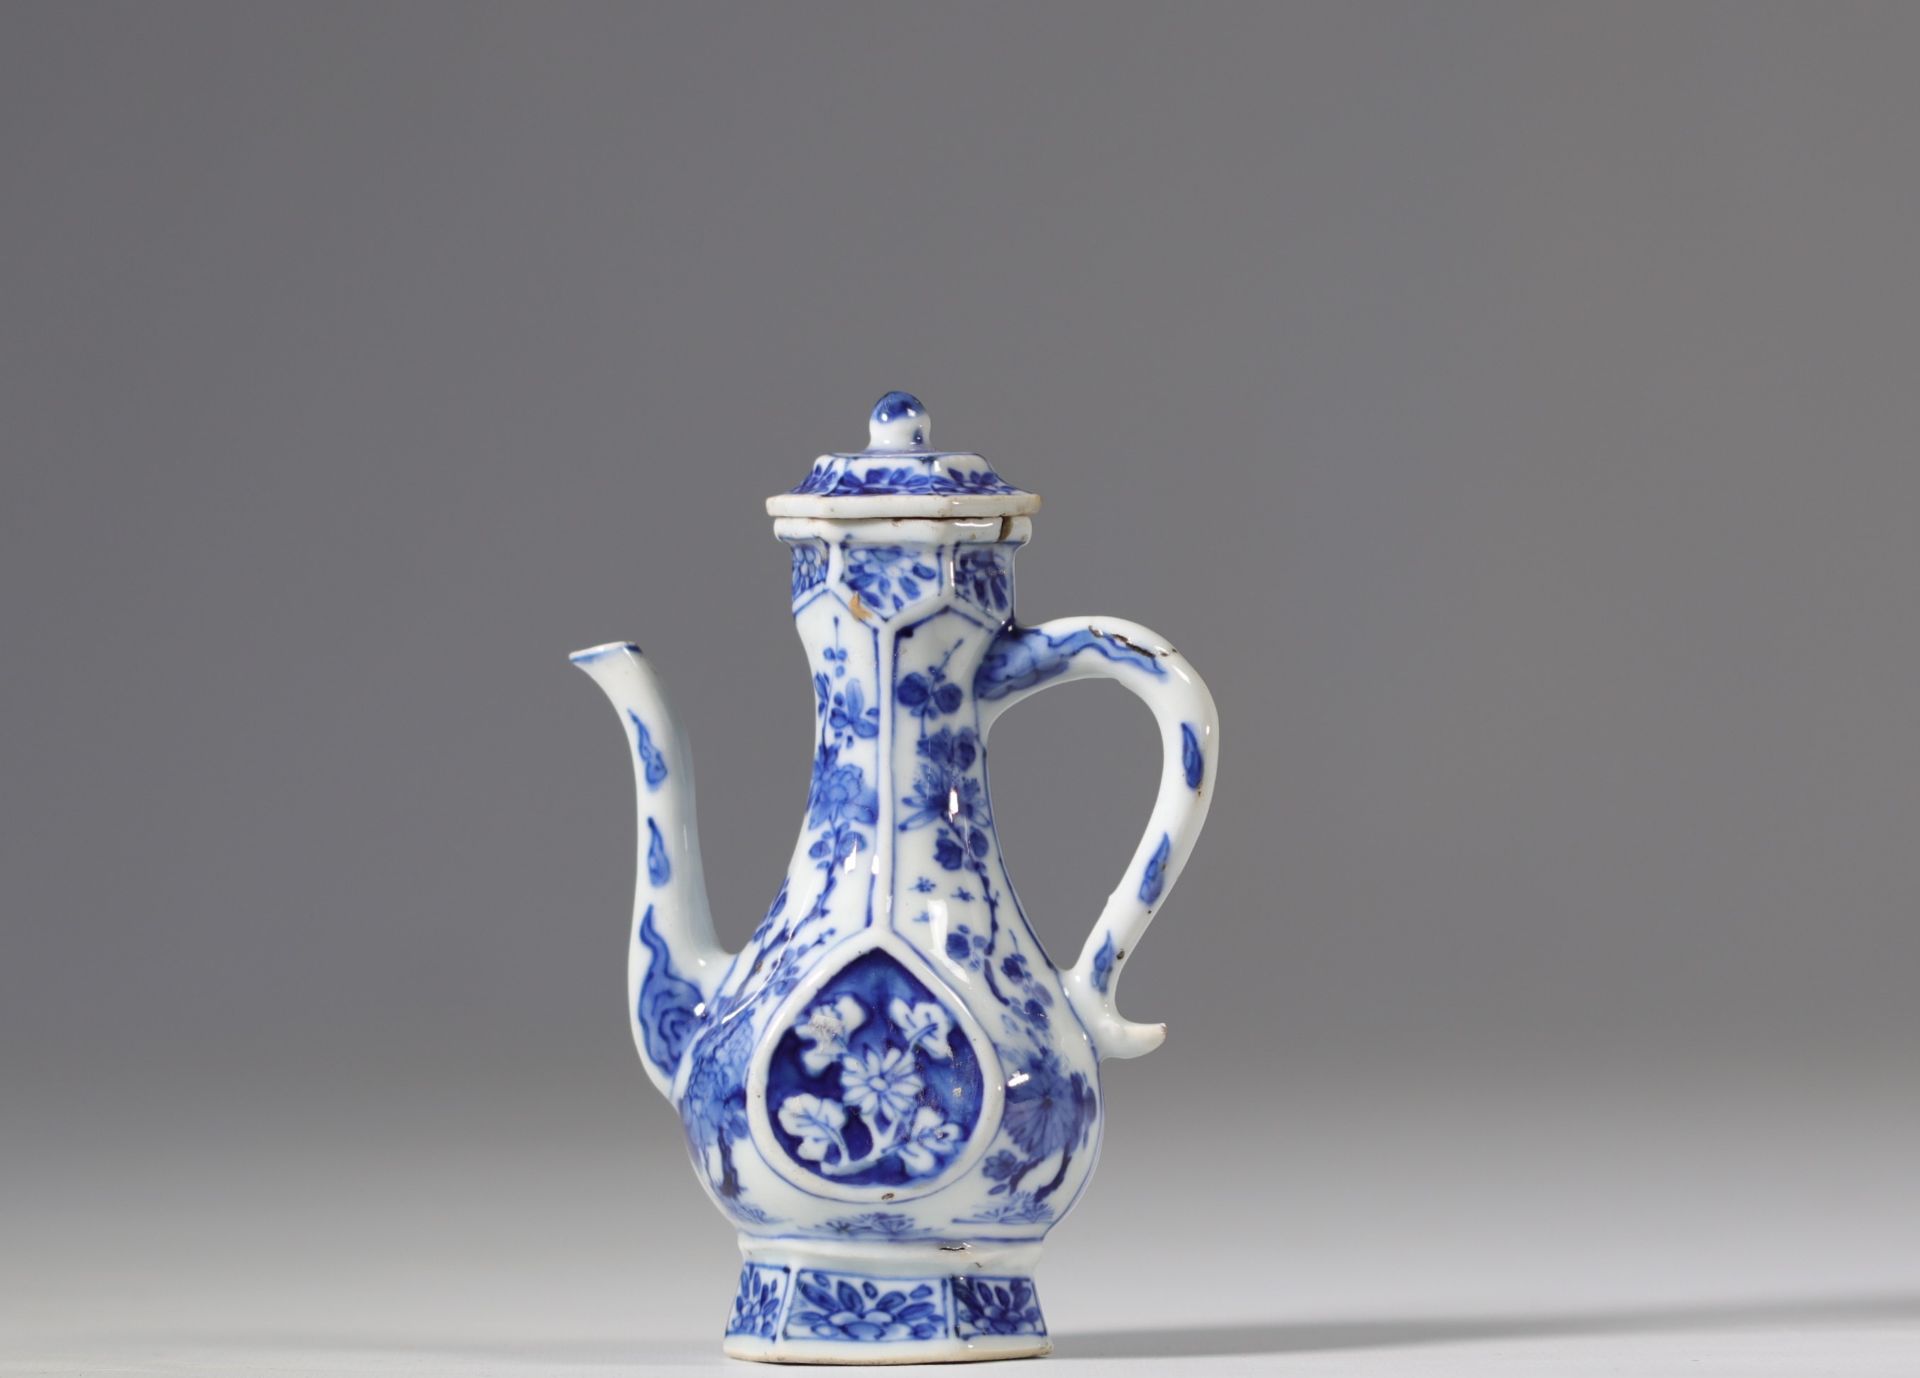 White and blue porcelain teapot with floral decoration from the 17th century Kangxi